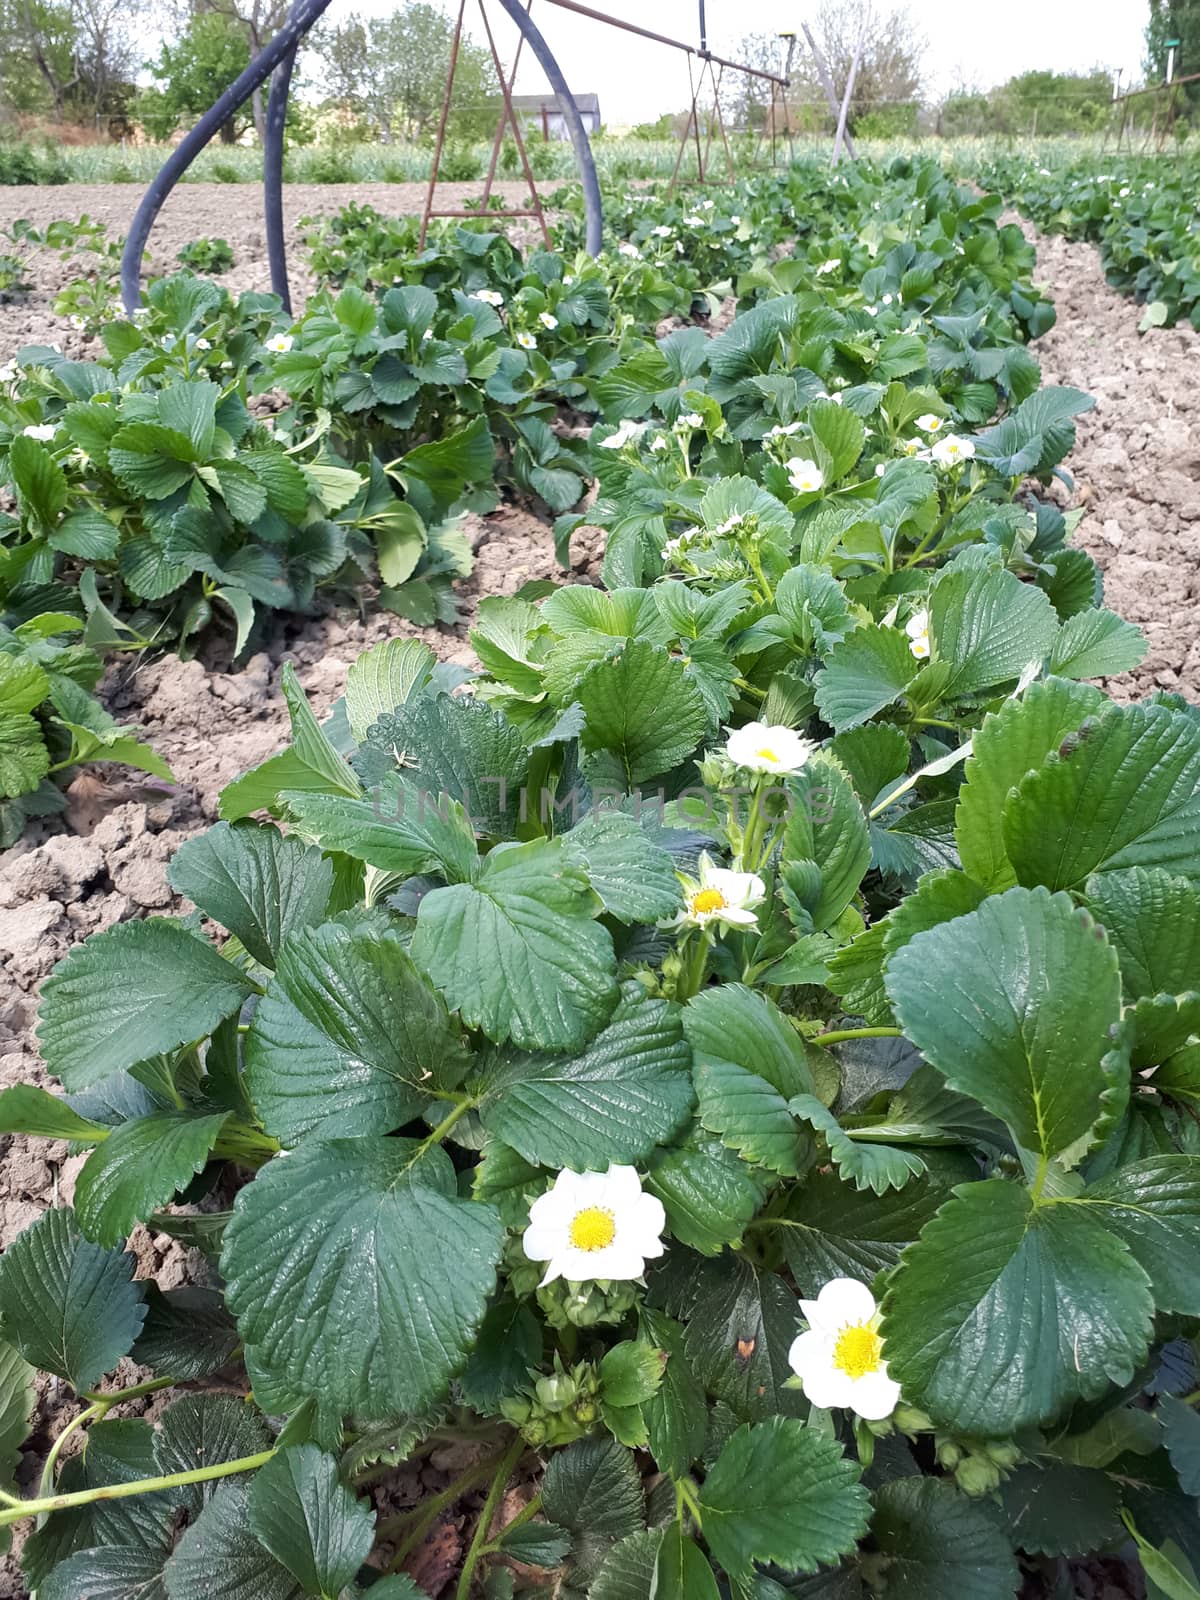 Flowering strawberry bushes in the garden. Strawberry bed.